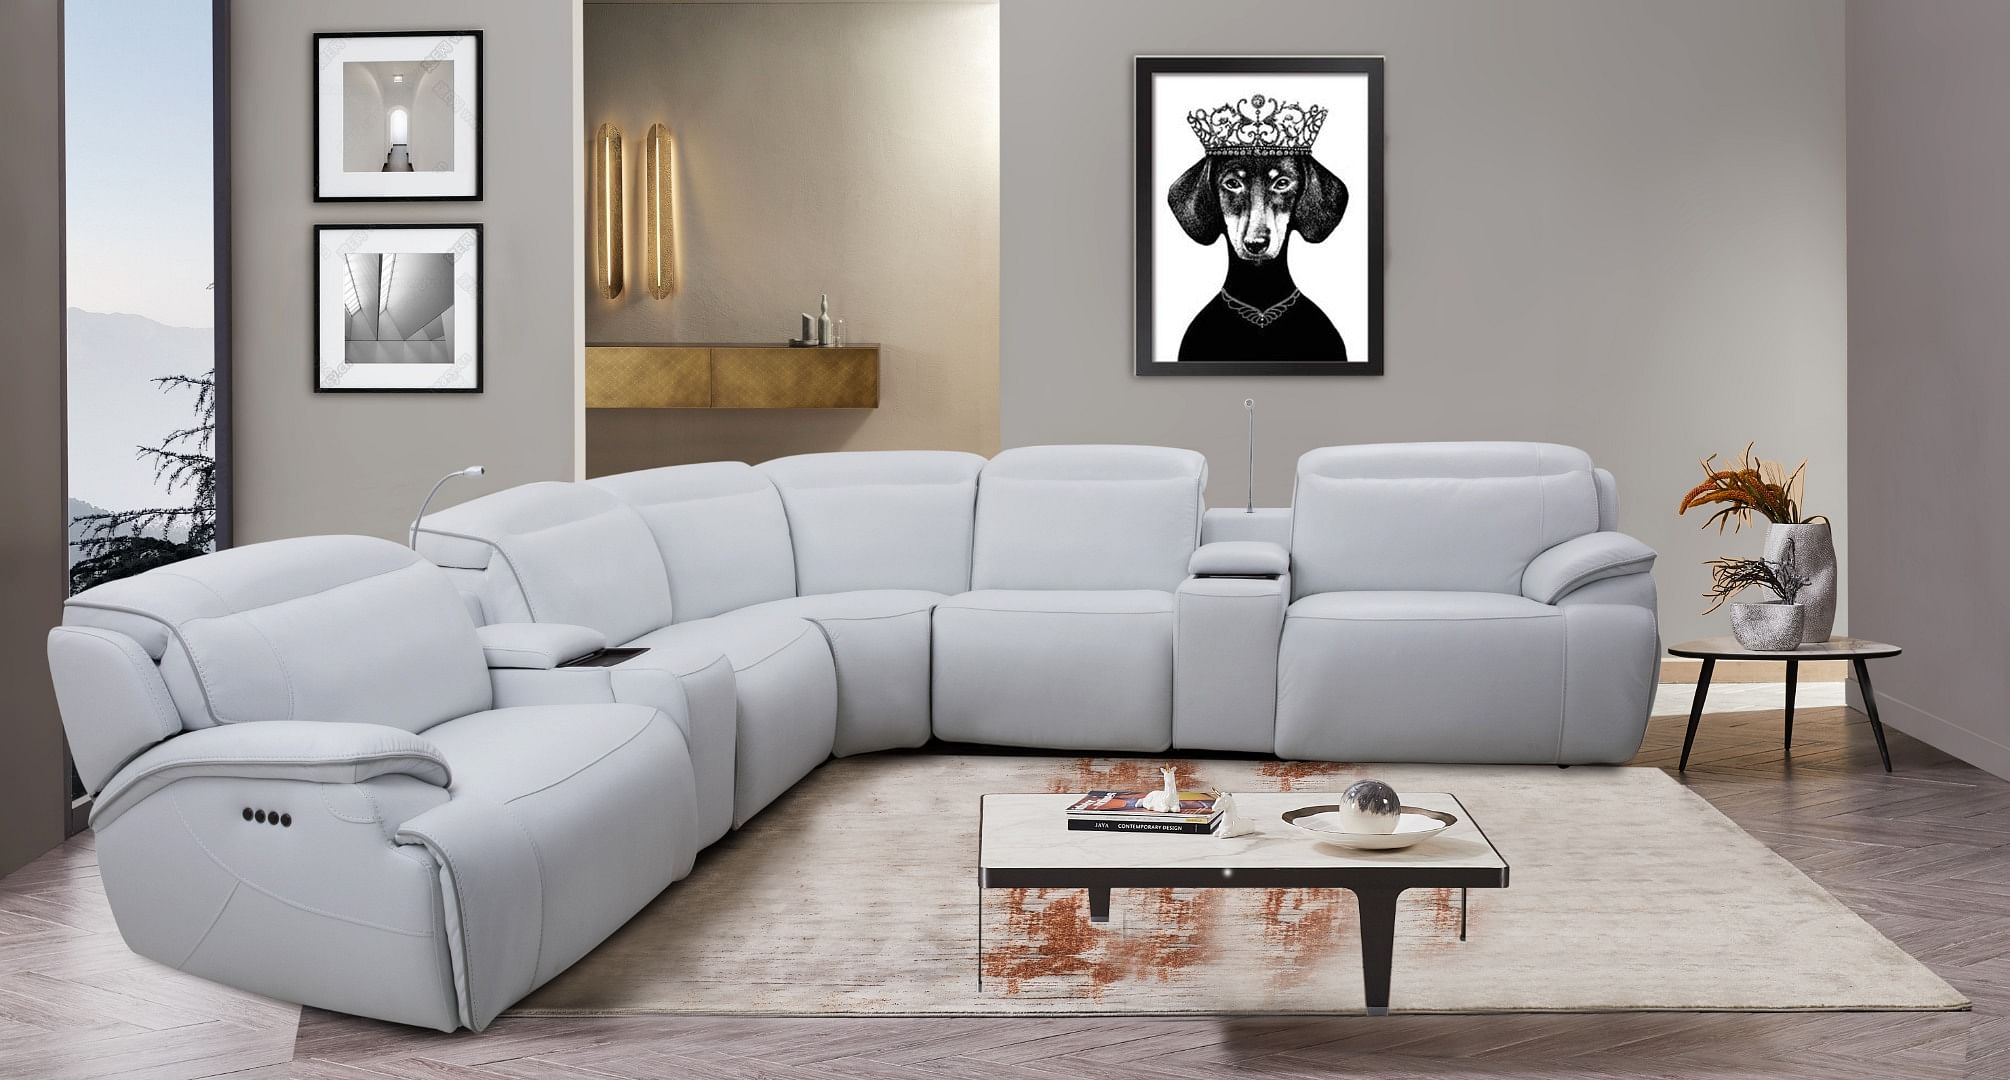 Devon 7-Piece Dual-Power Reclining Sectional in White - Website only Price